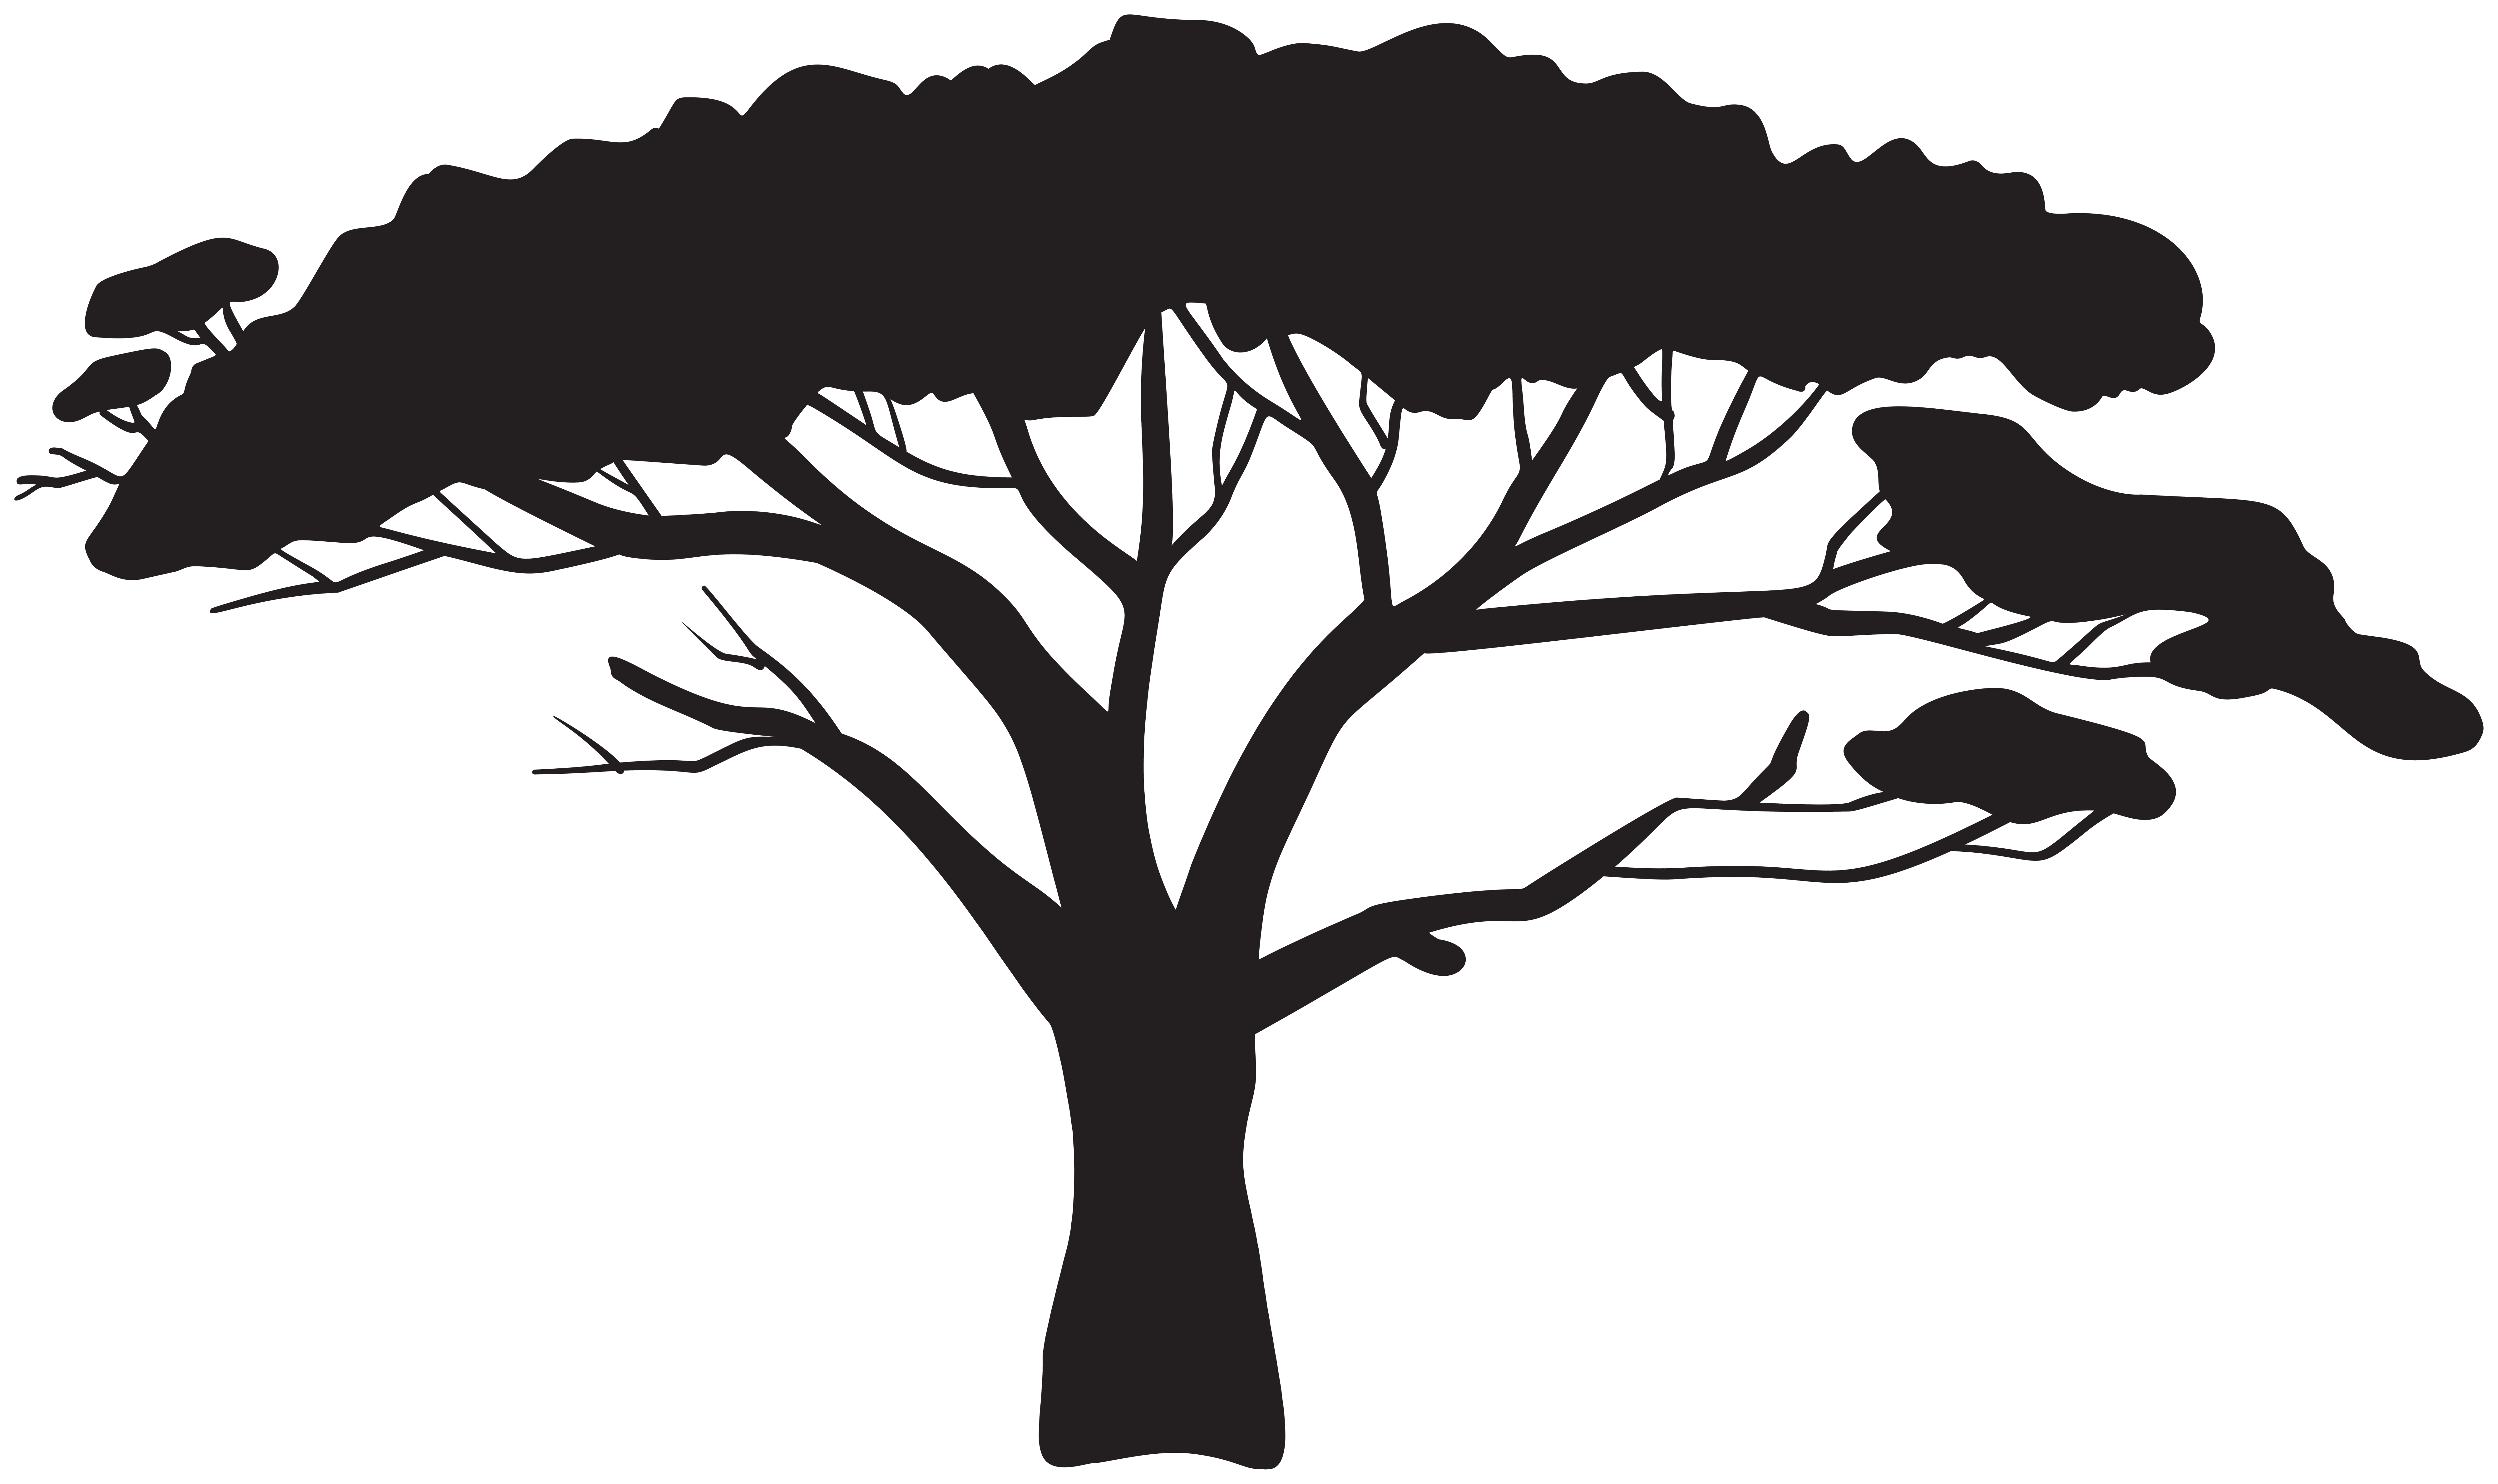 free tree clipart images